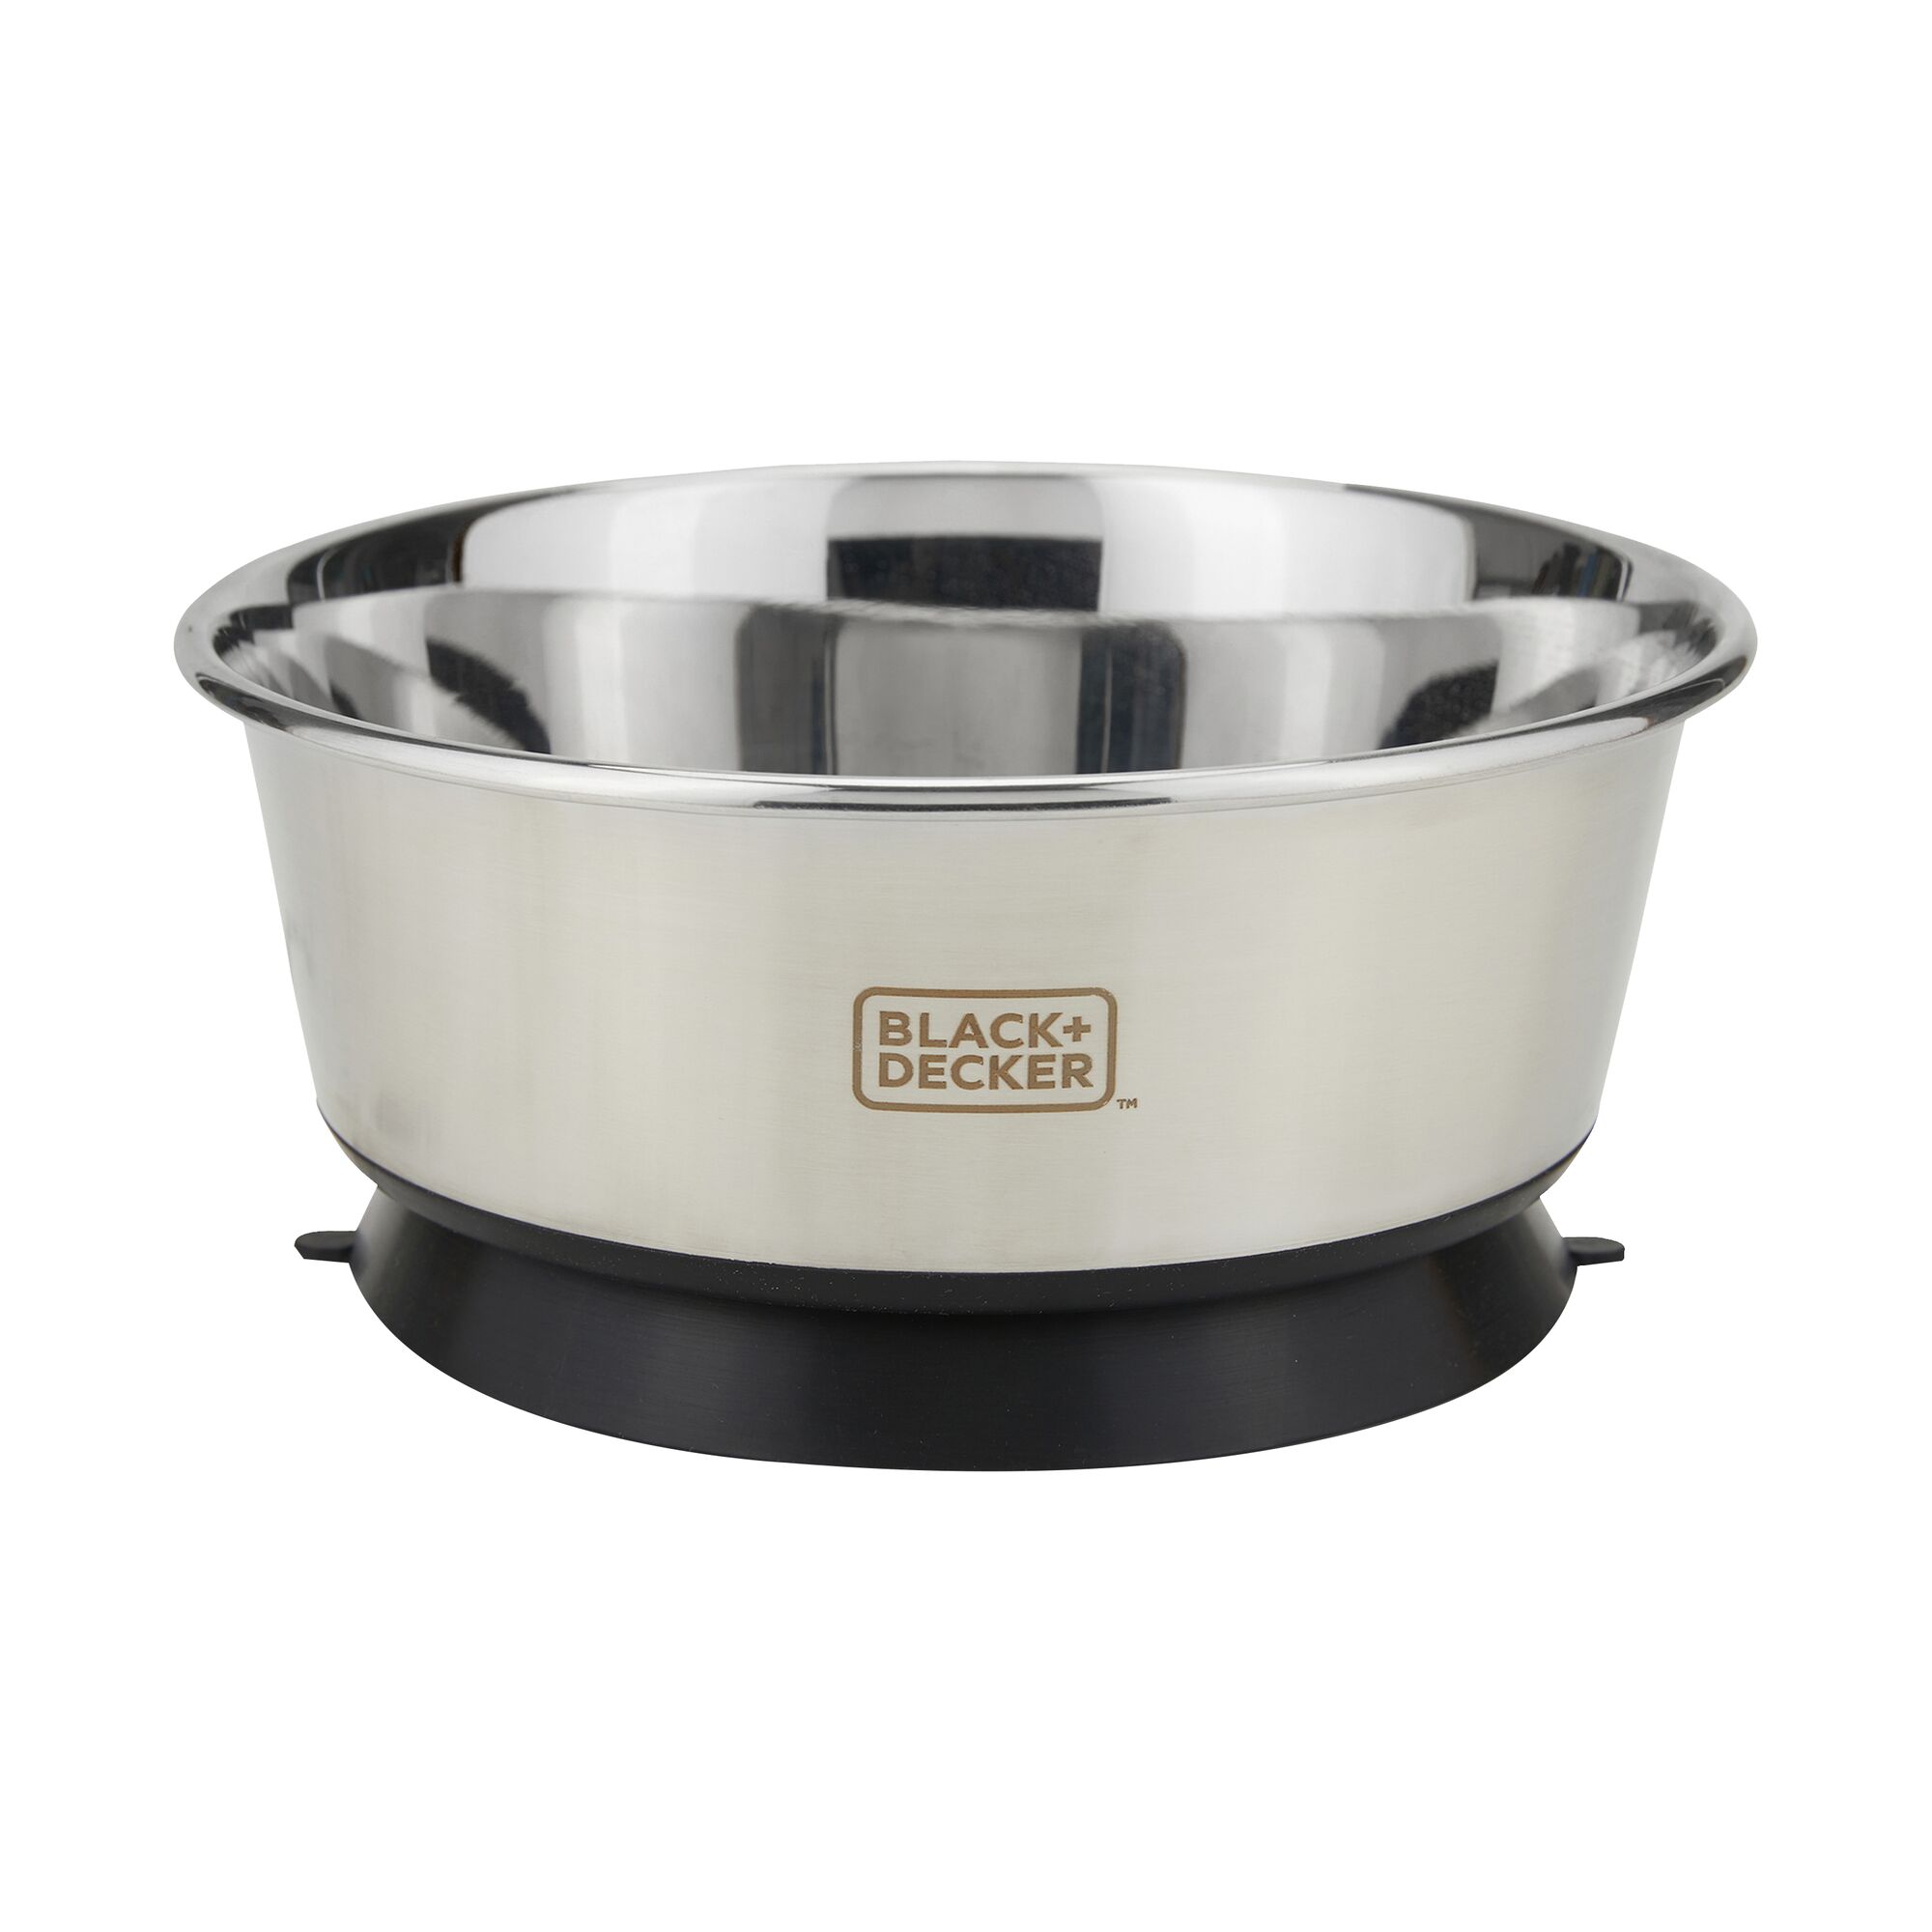 Profile view of the BLACK+DECKER suction cup dog bowl